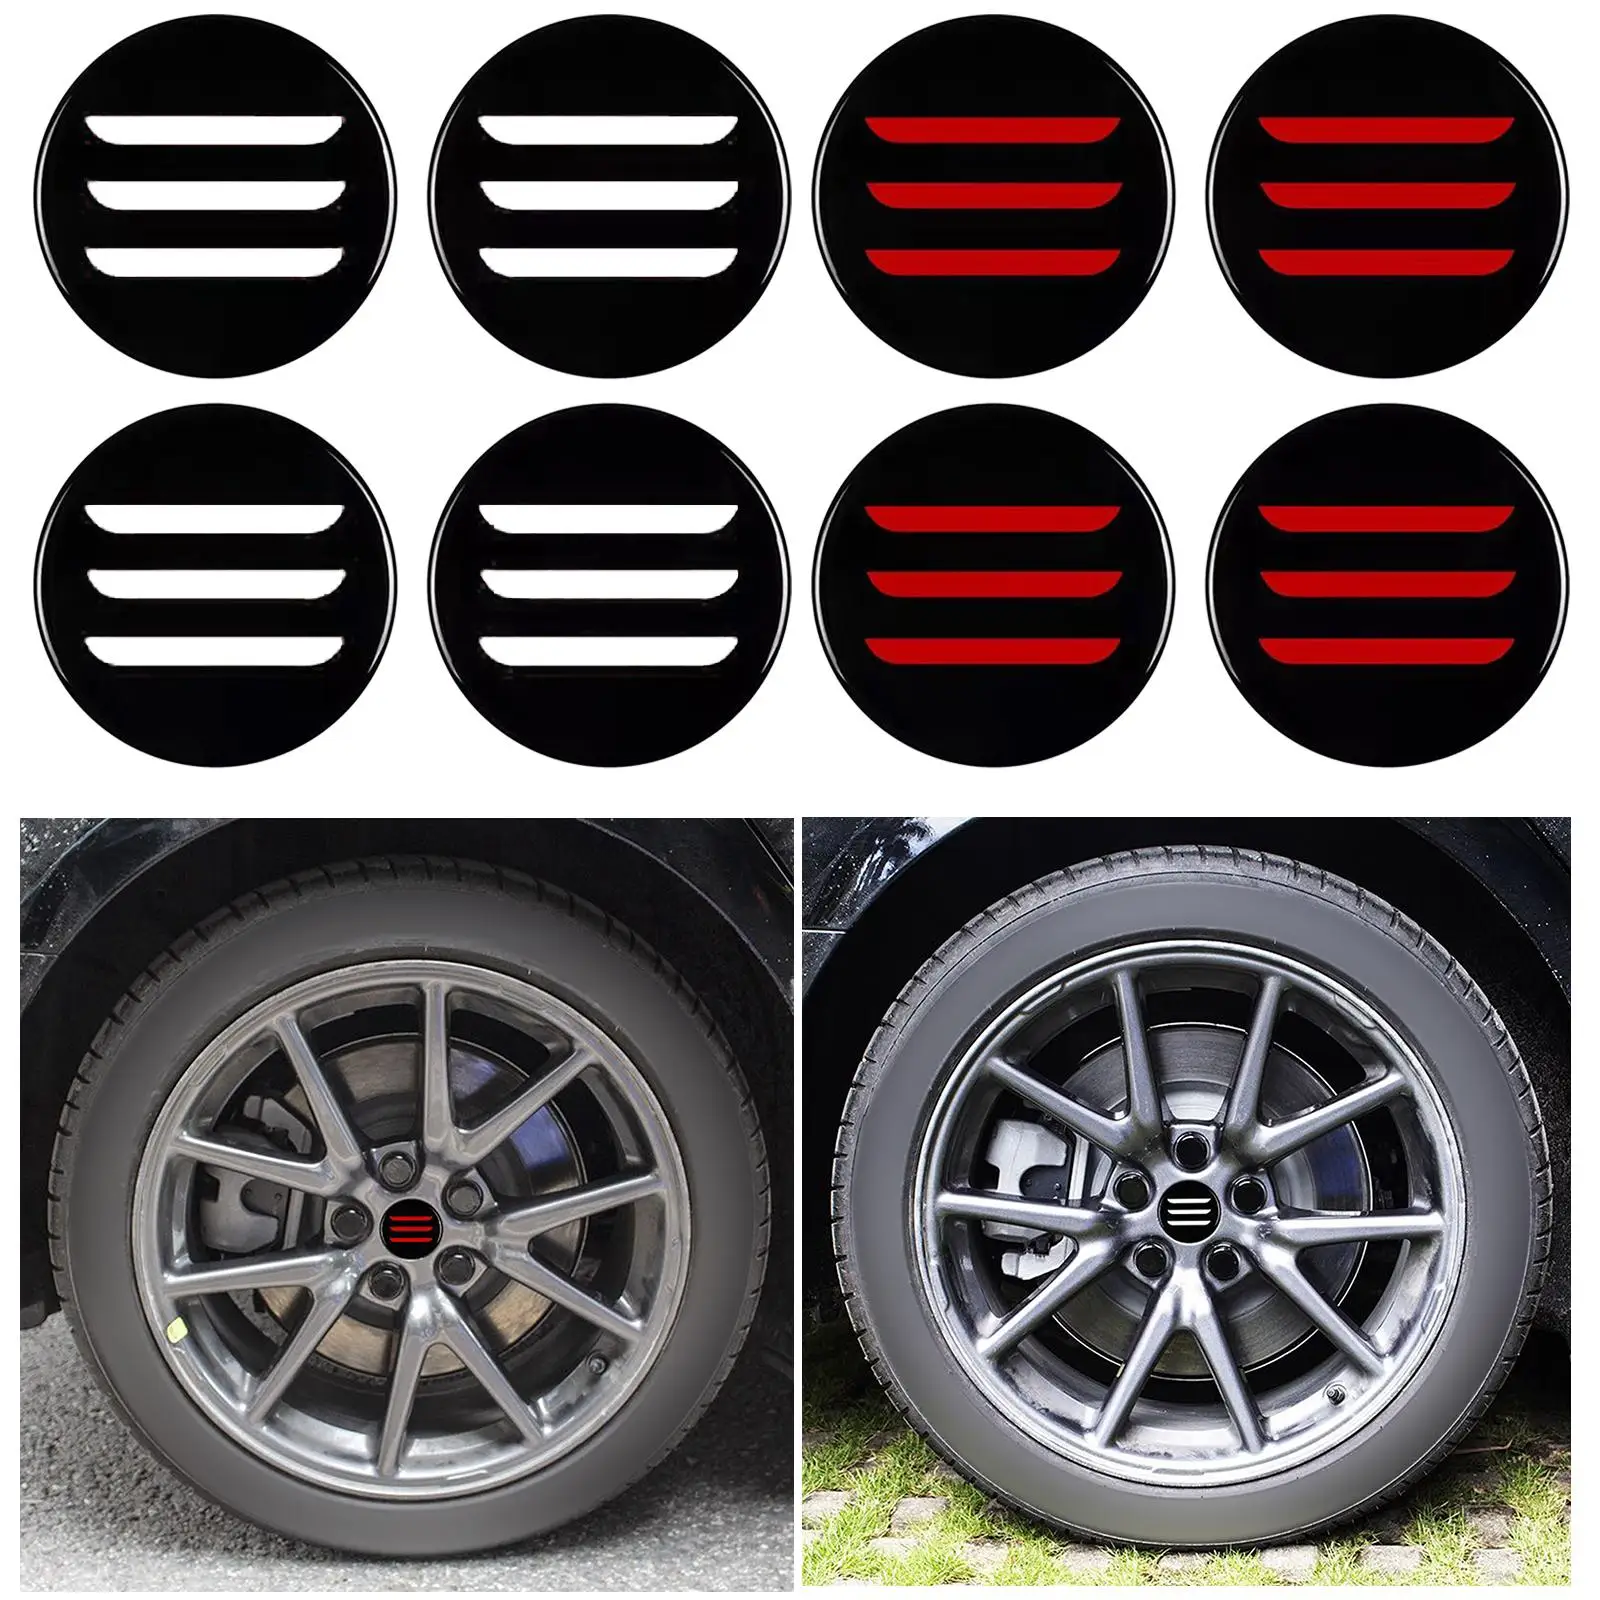 Set of 4 Auto Wheel Hub Caps Center Cover Frame Decorate Waterproof Anti Dust Styling Fits for Tesla Model 3 Replace Protective